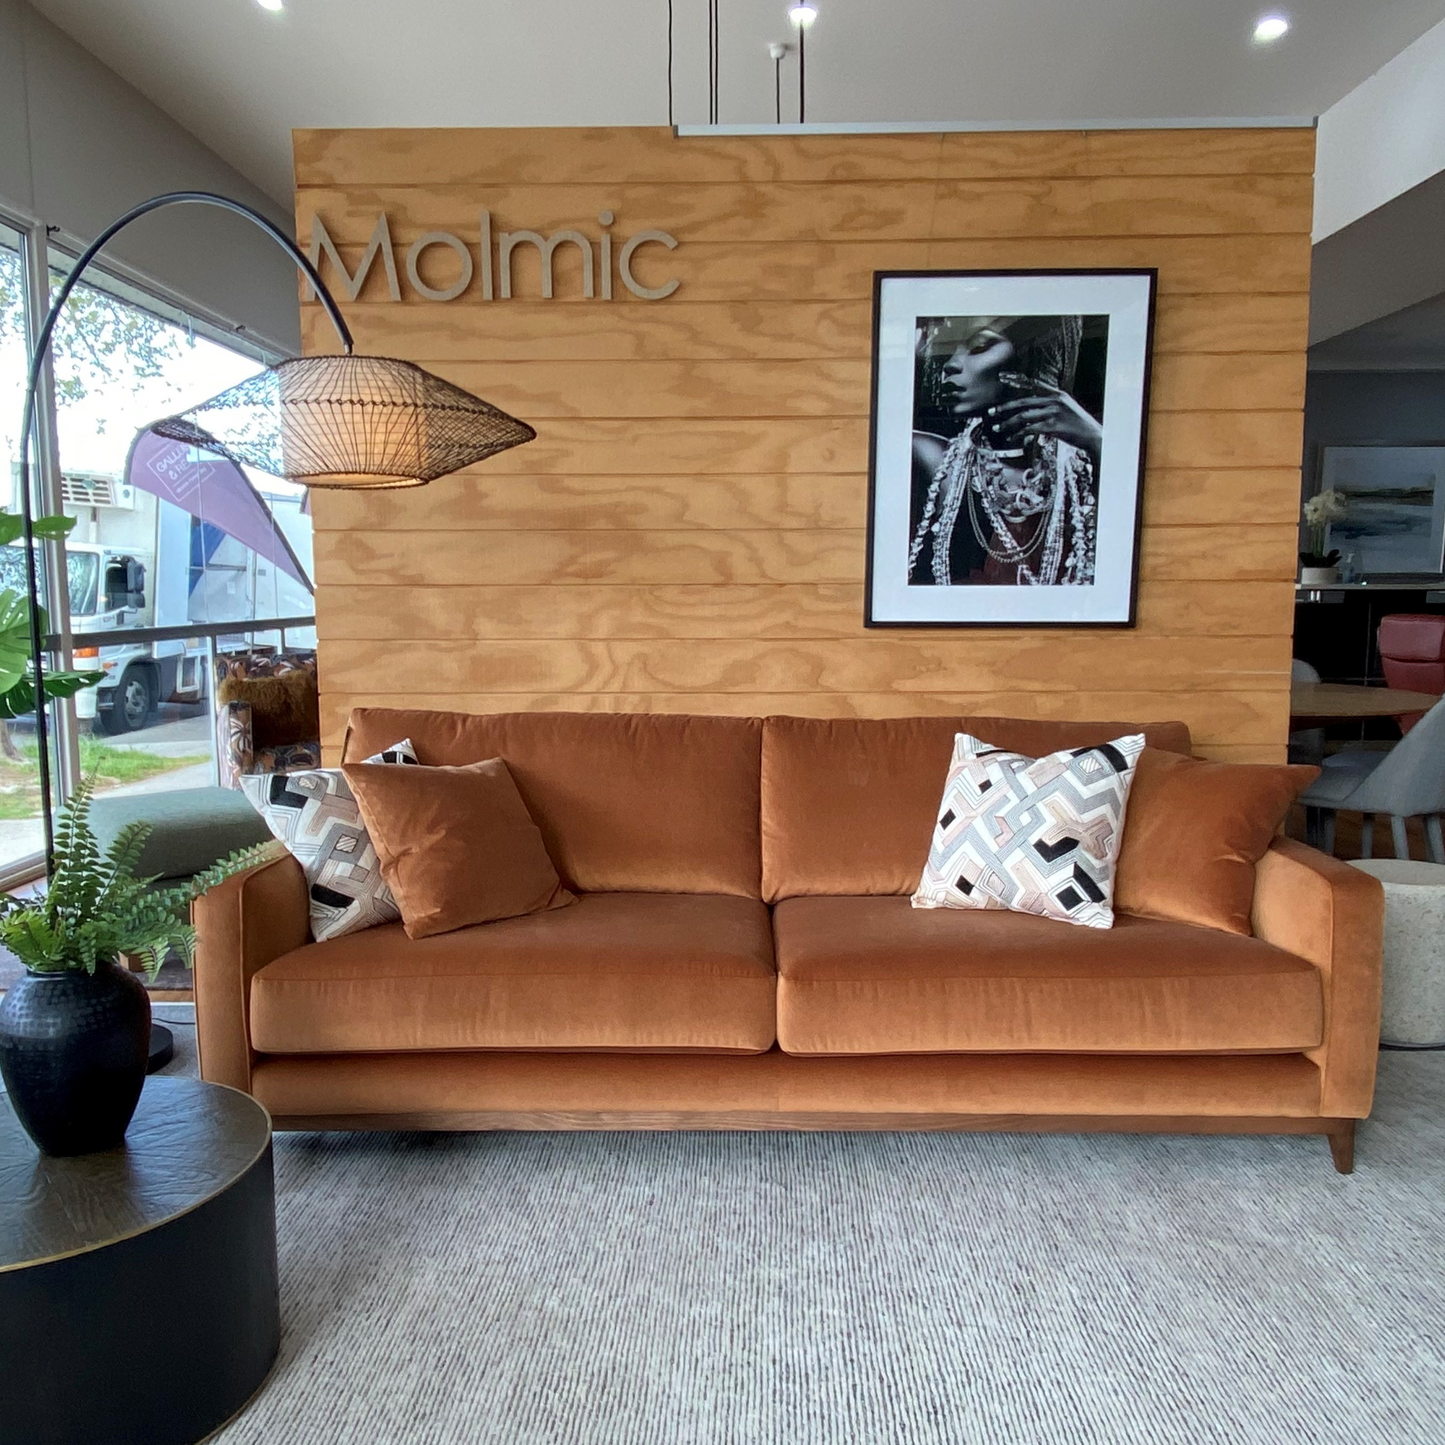 Barker 3.5 Seater Sofa by Molmic